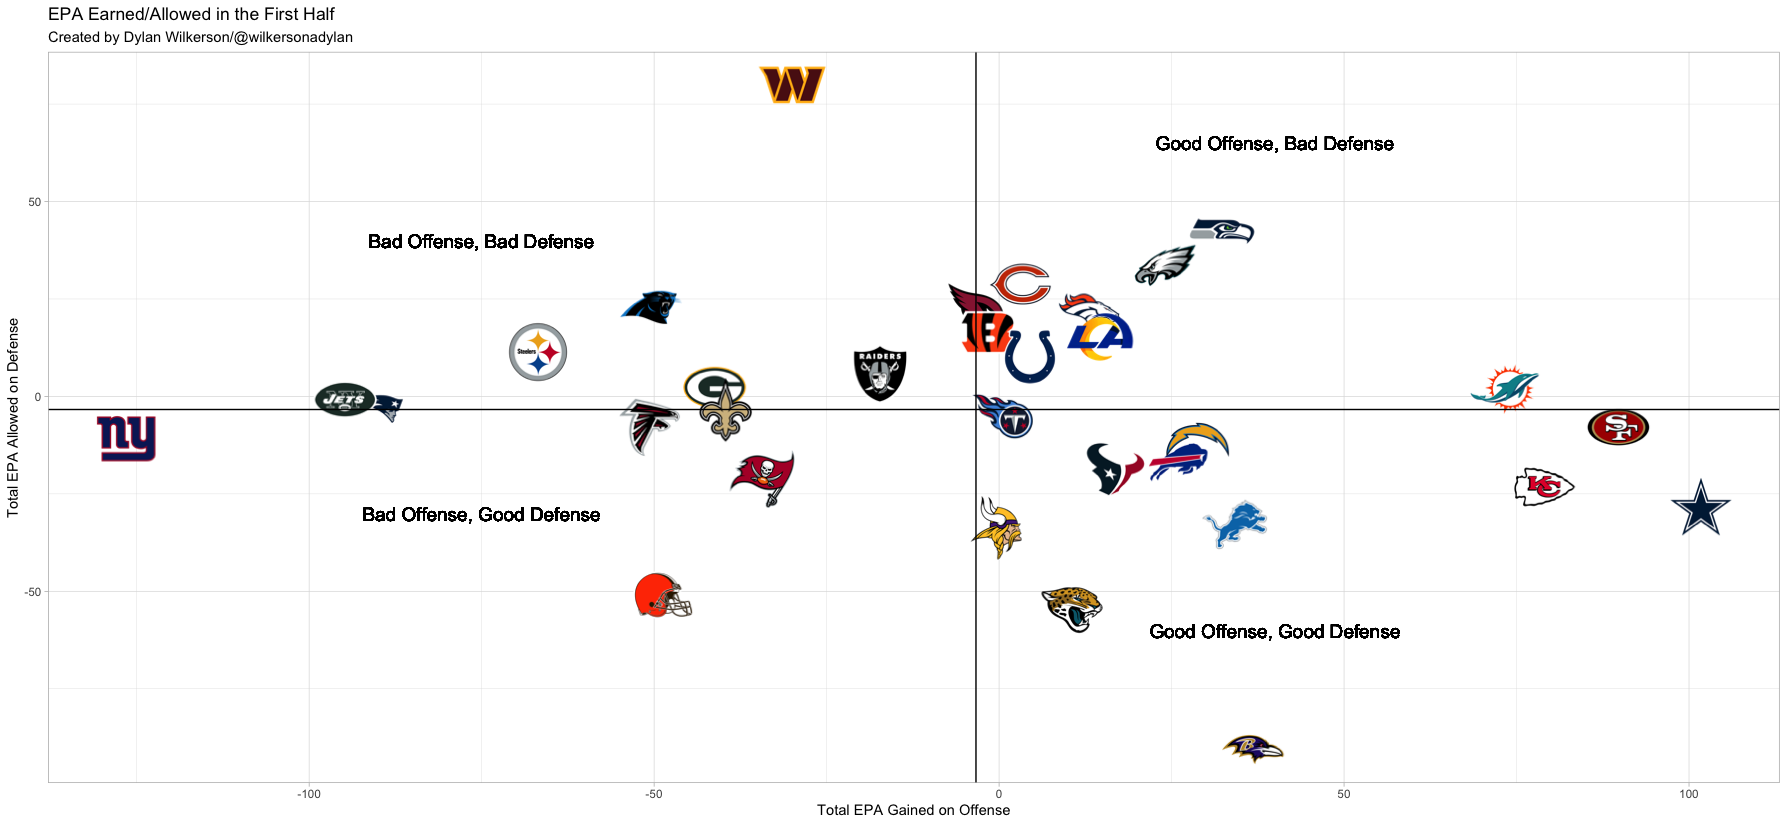 This graph shows each NFL team's offensive and defensive EPA in the first half of games. 